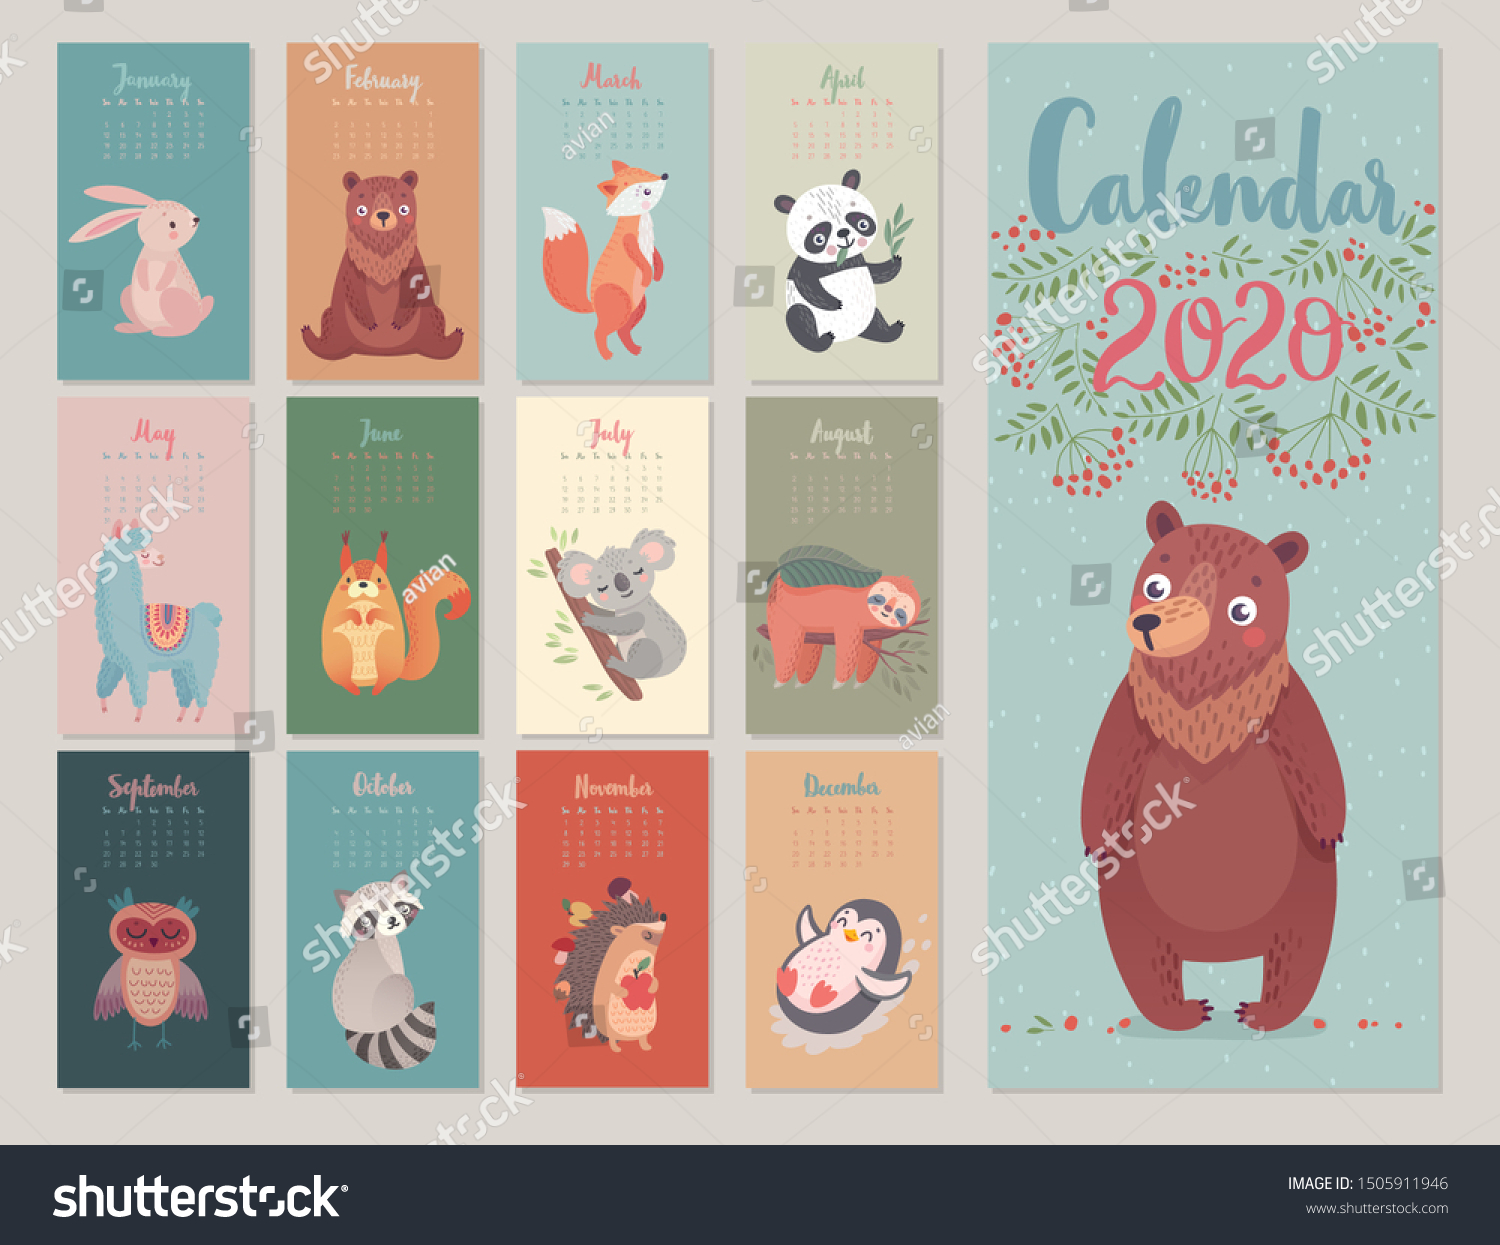 Calendar 2020 Woodland Characters Cute Forest Stock Vector (Royalty ...